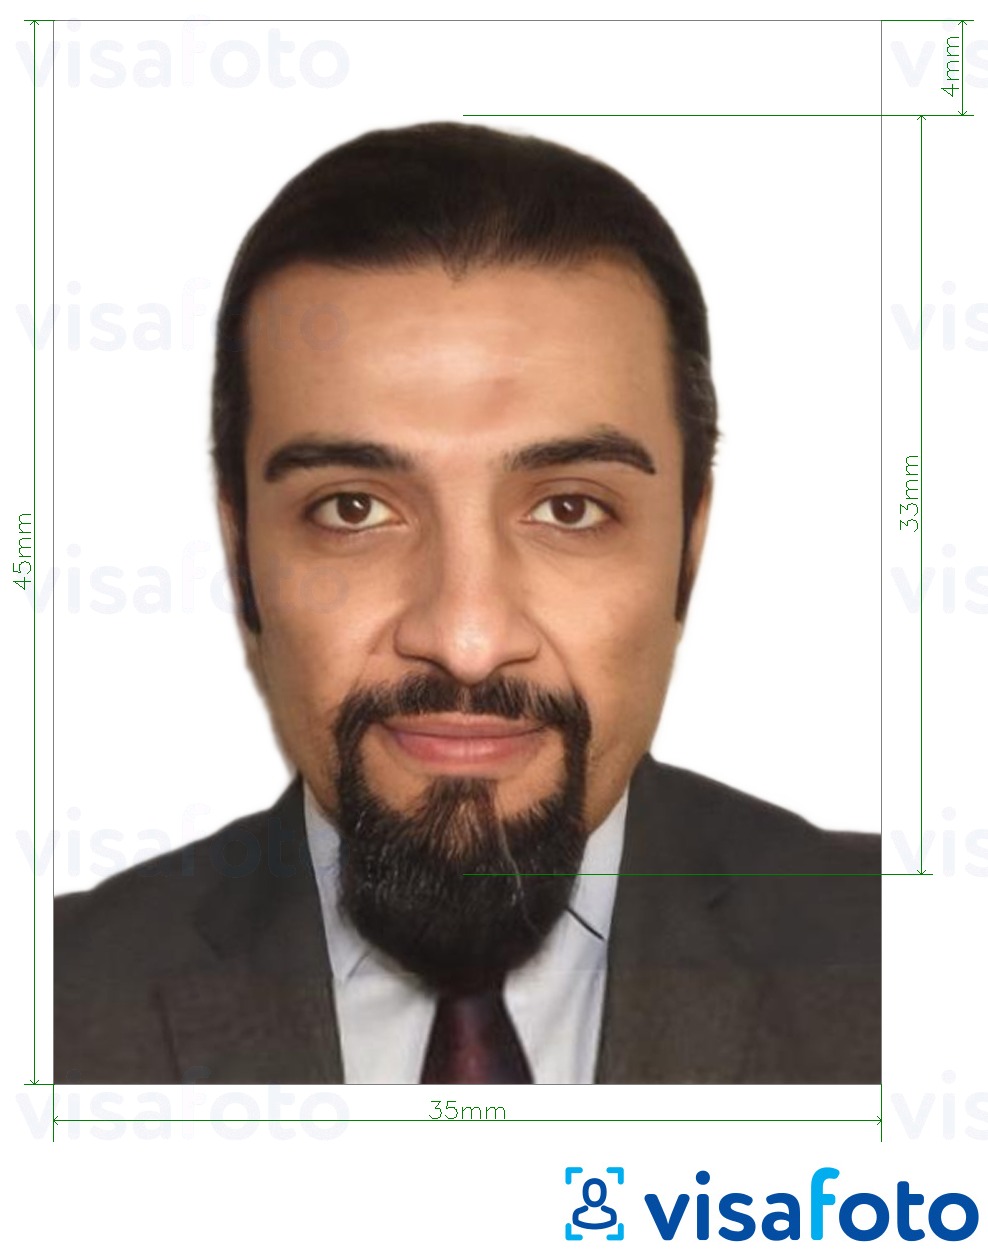 Example of photo for Jordan visa 3.5x4.5 cm (35x45 mm) with exact size specification